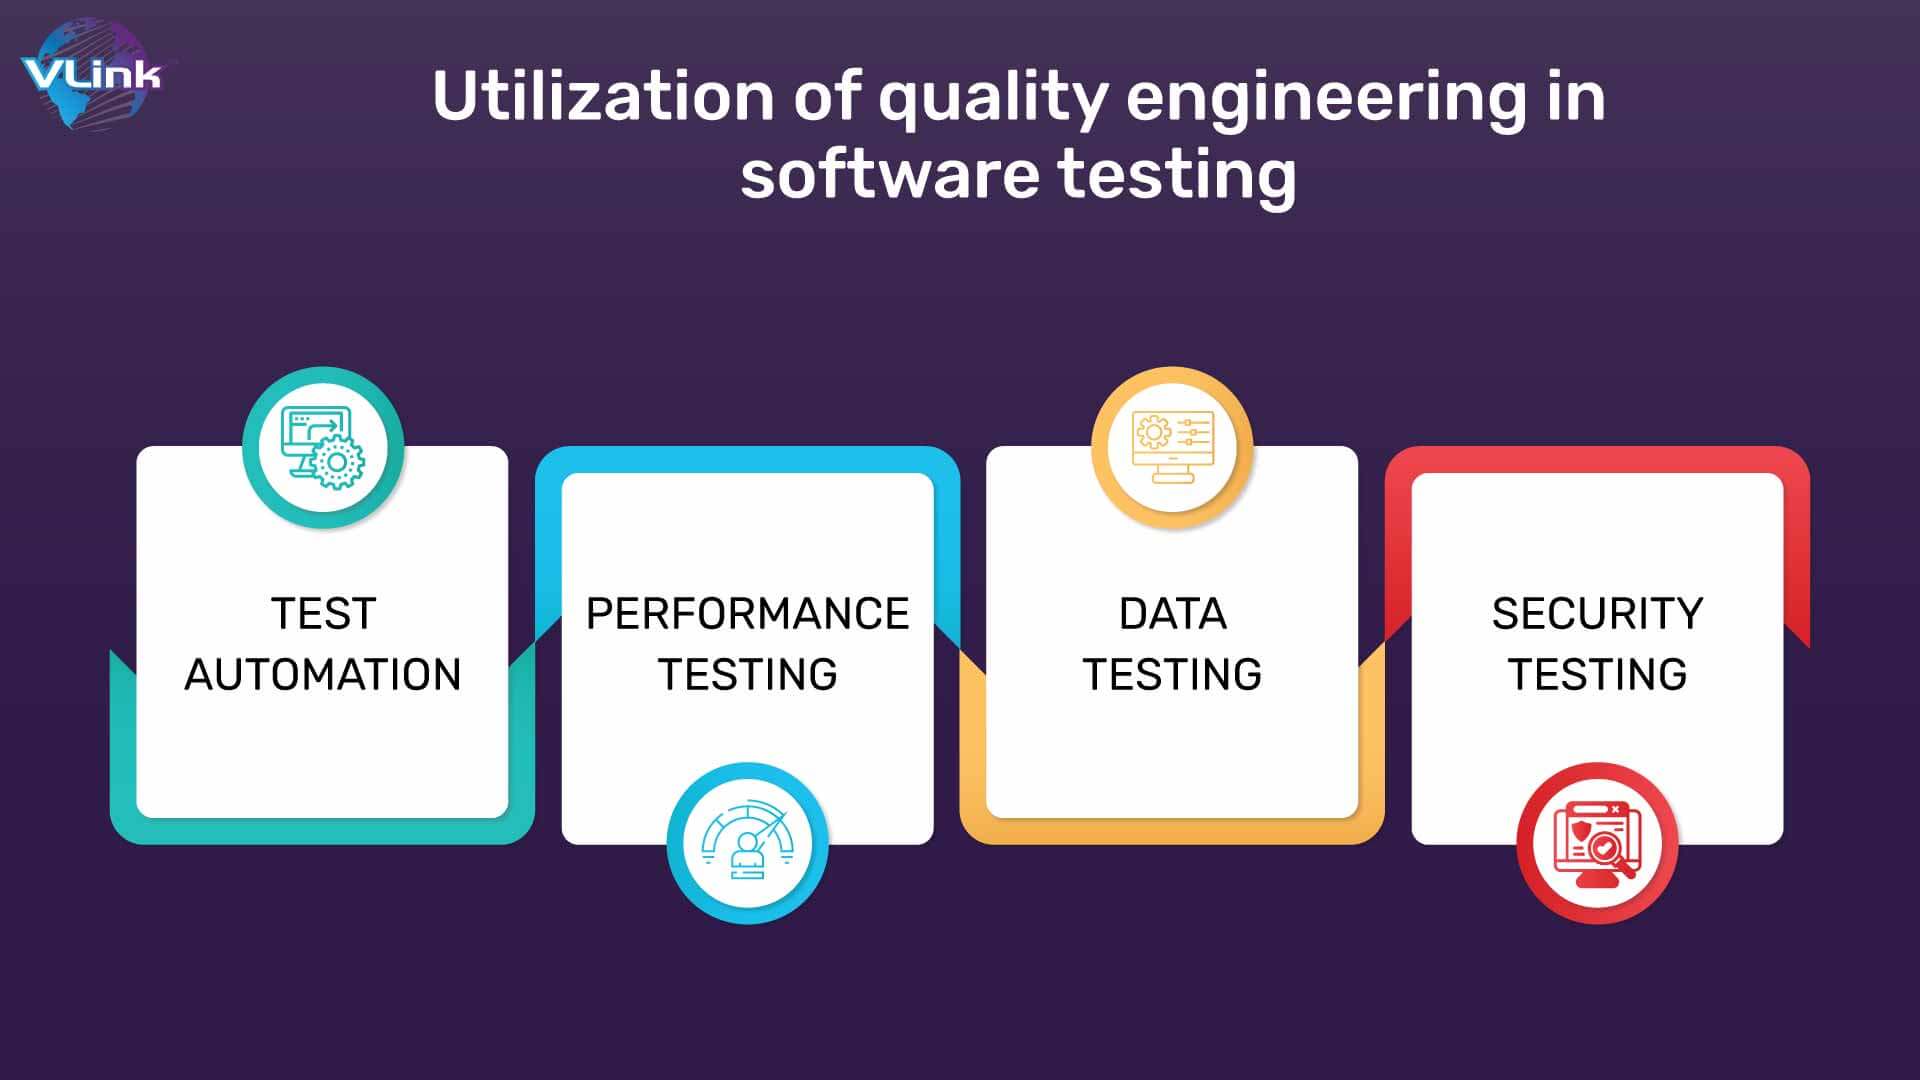 Utilization of quality engineering in software testing